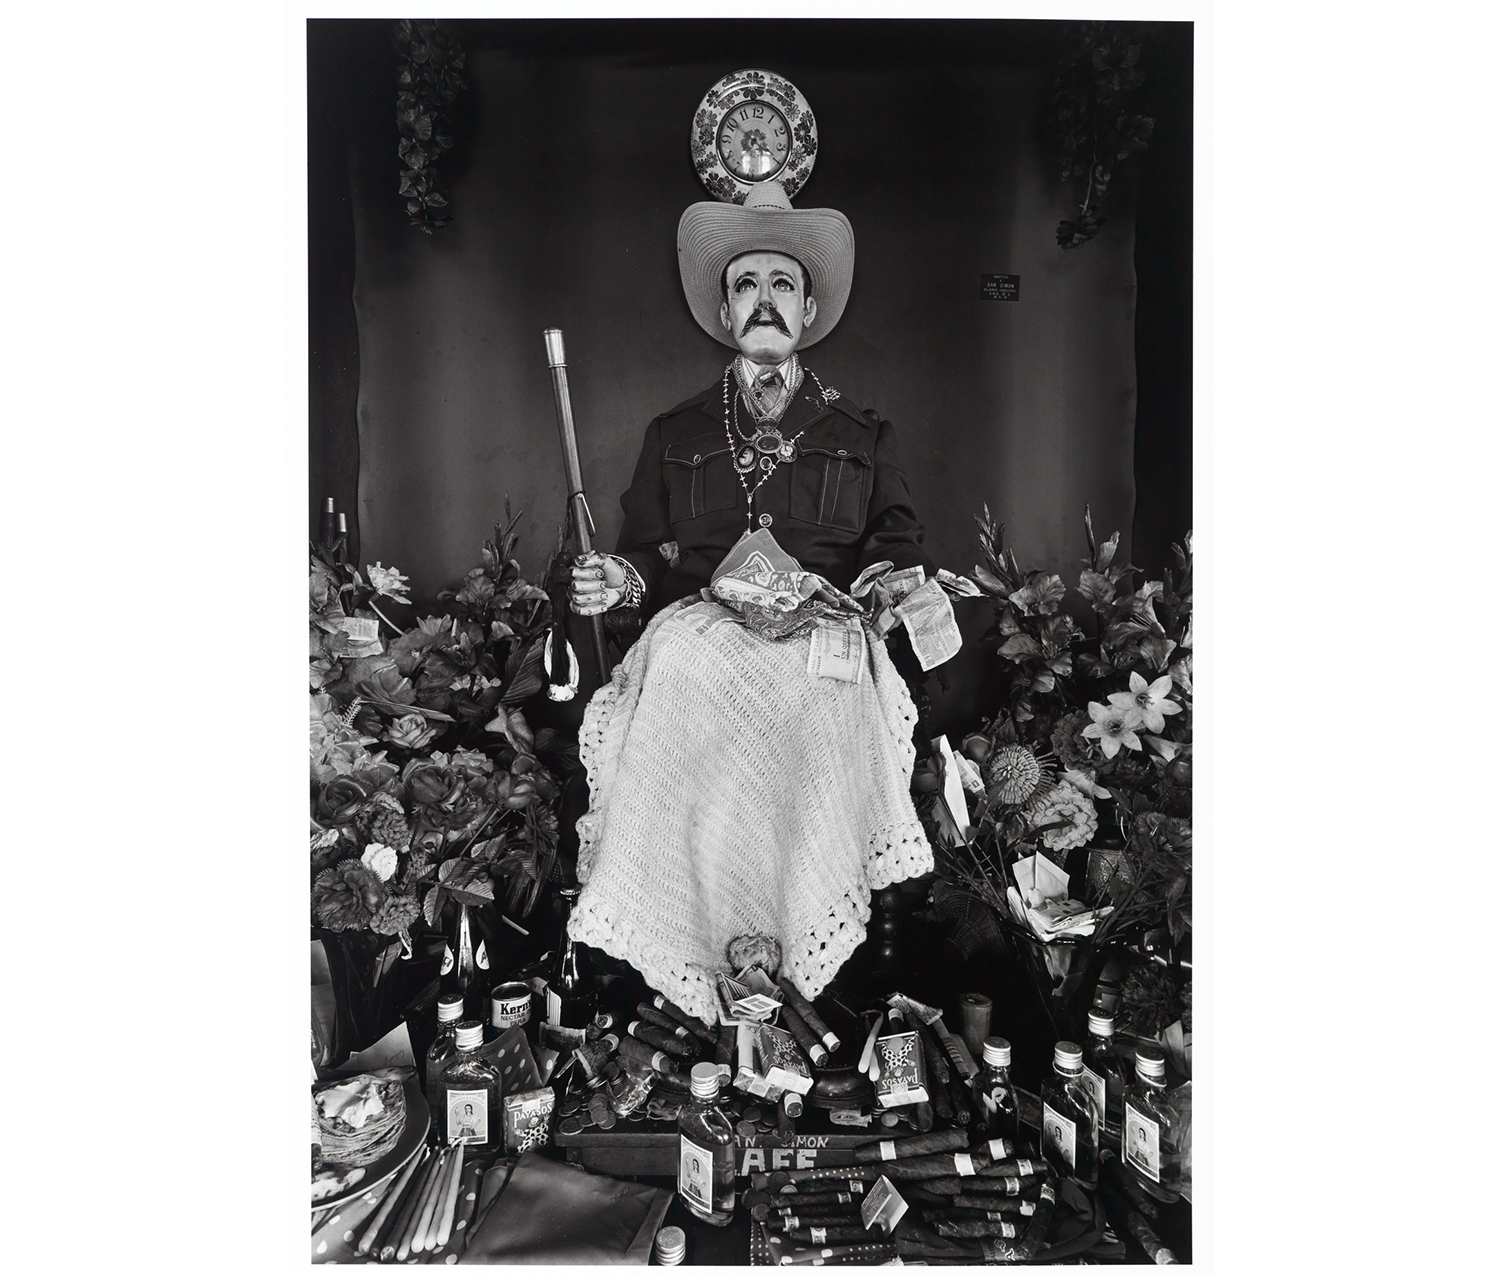 carved figure of a man with mustache, cowboy hat, coat, rosary around his neck, fake flowers around him, a floral clock over his head, cigars, alcohol, bandanas and money scattered around his feet and over his lap